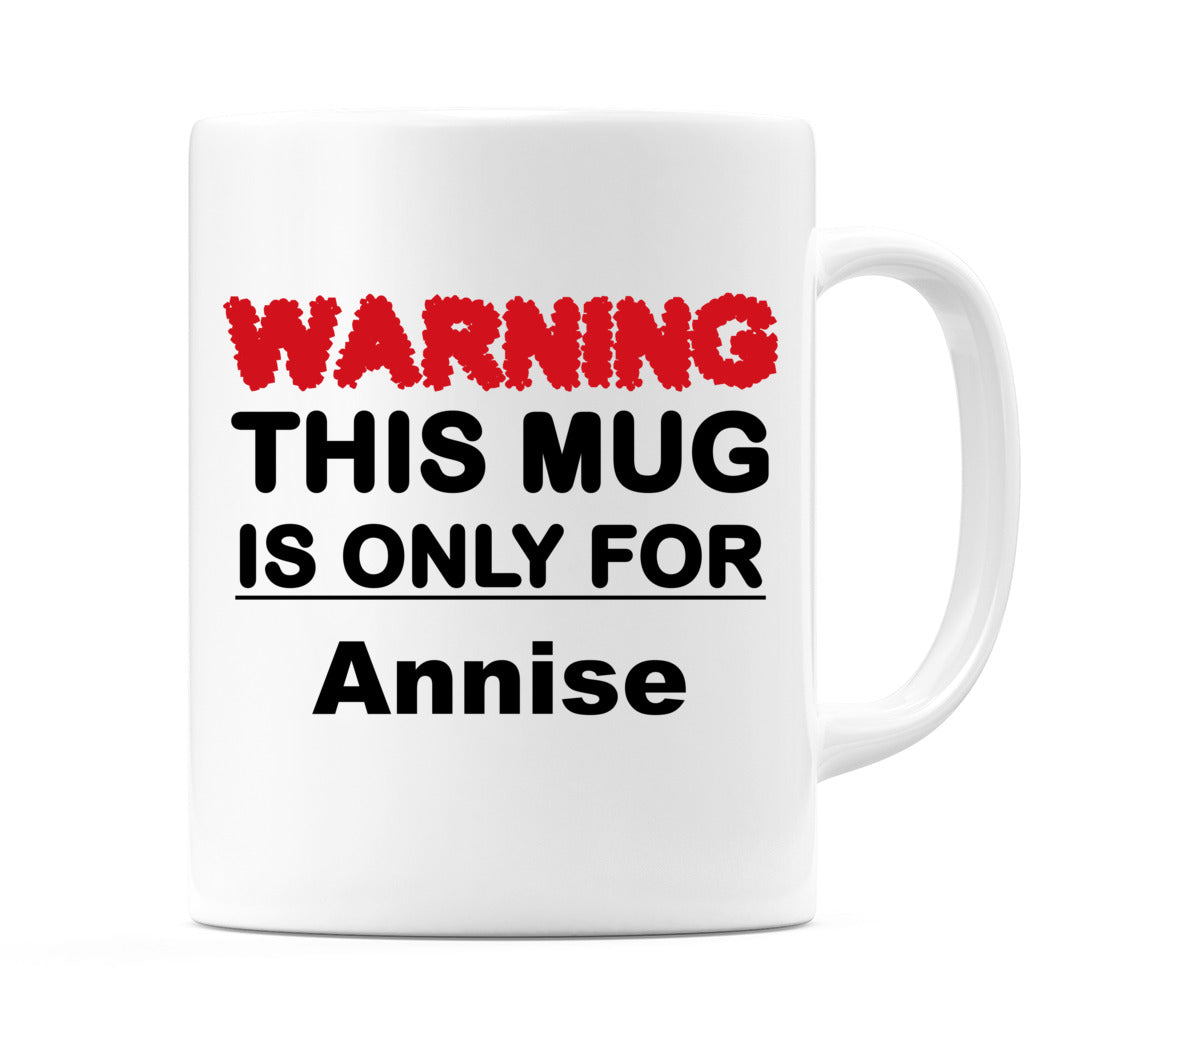 Warning This Mug is ONLY for Annise Mug